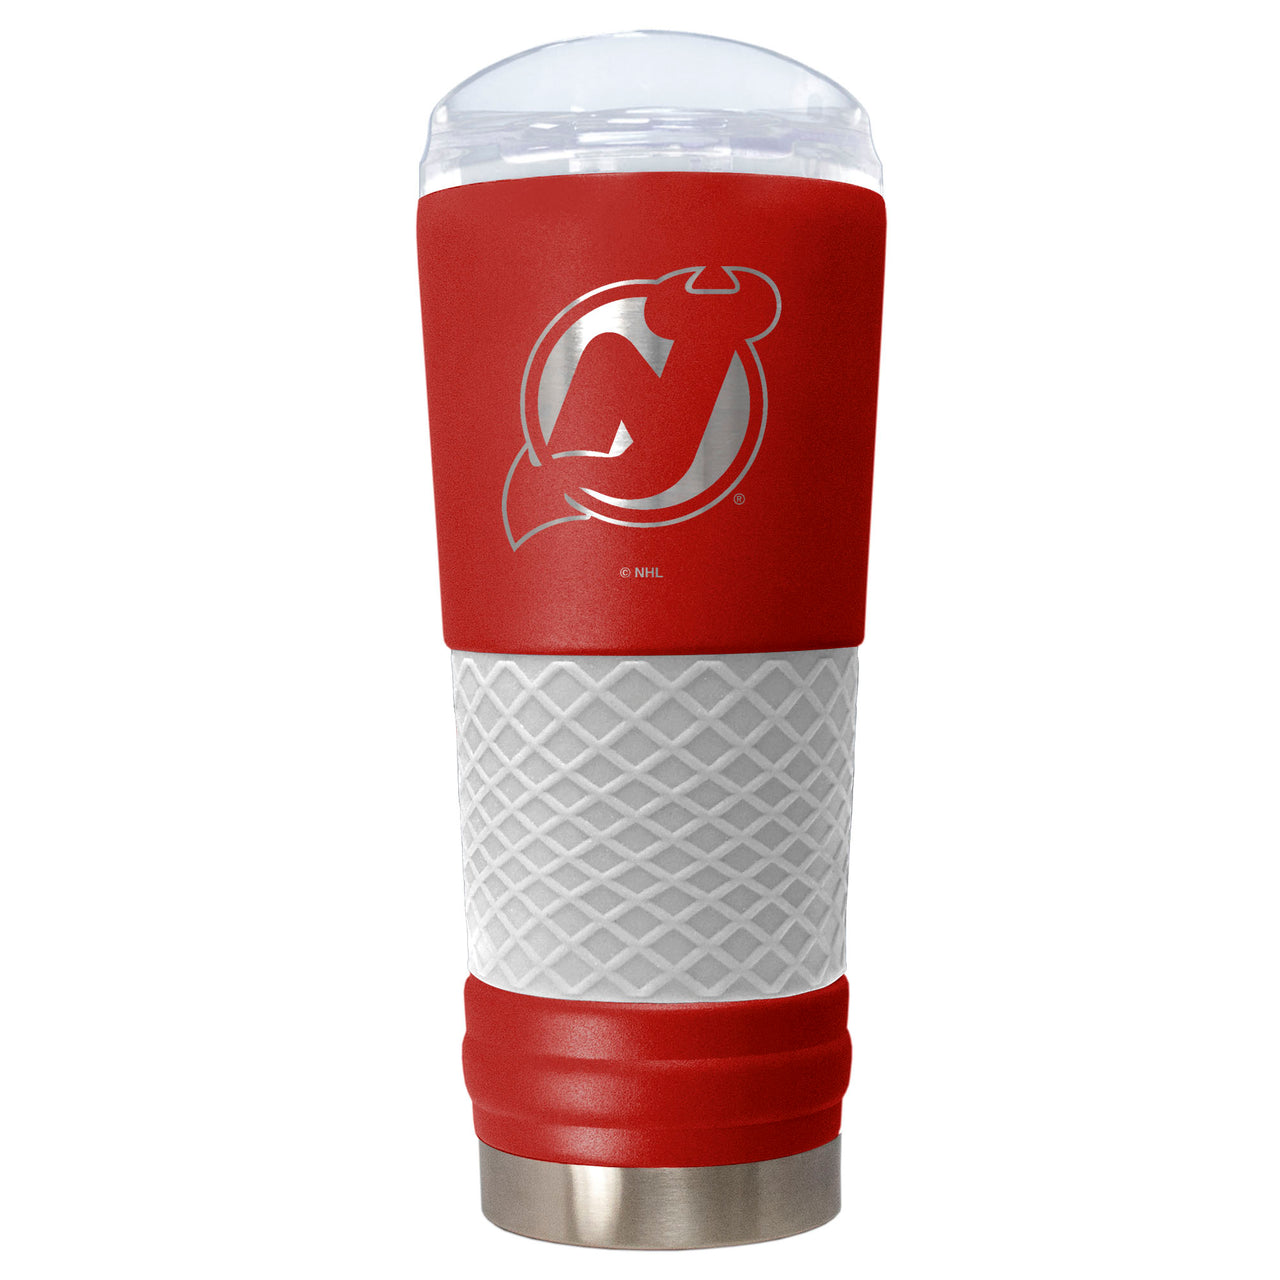 New Jersey Devils "The Draft" 24 oz. Stainless Steel Travel Tumbler - Dynasty Sports & Framing 